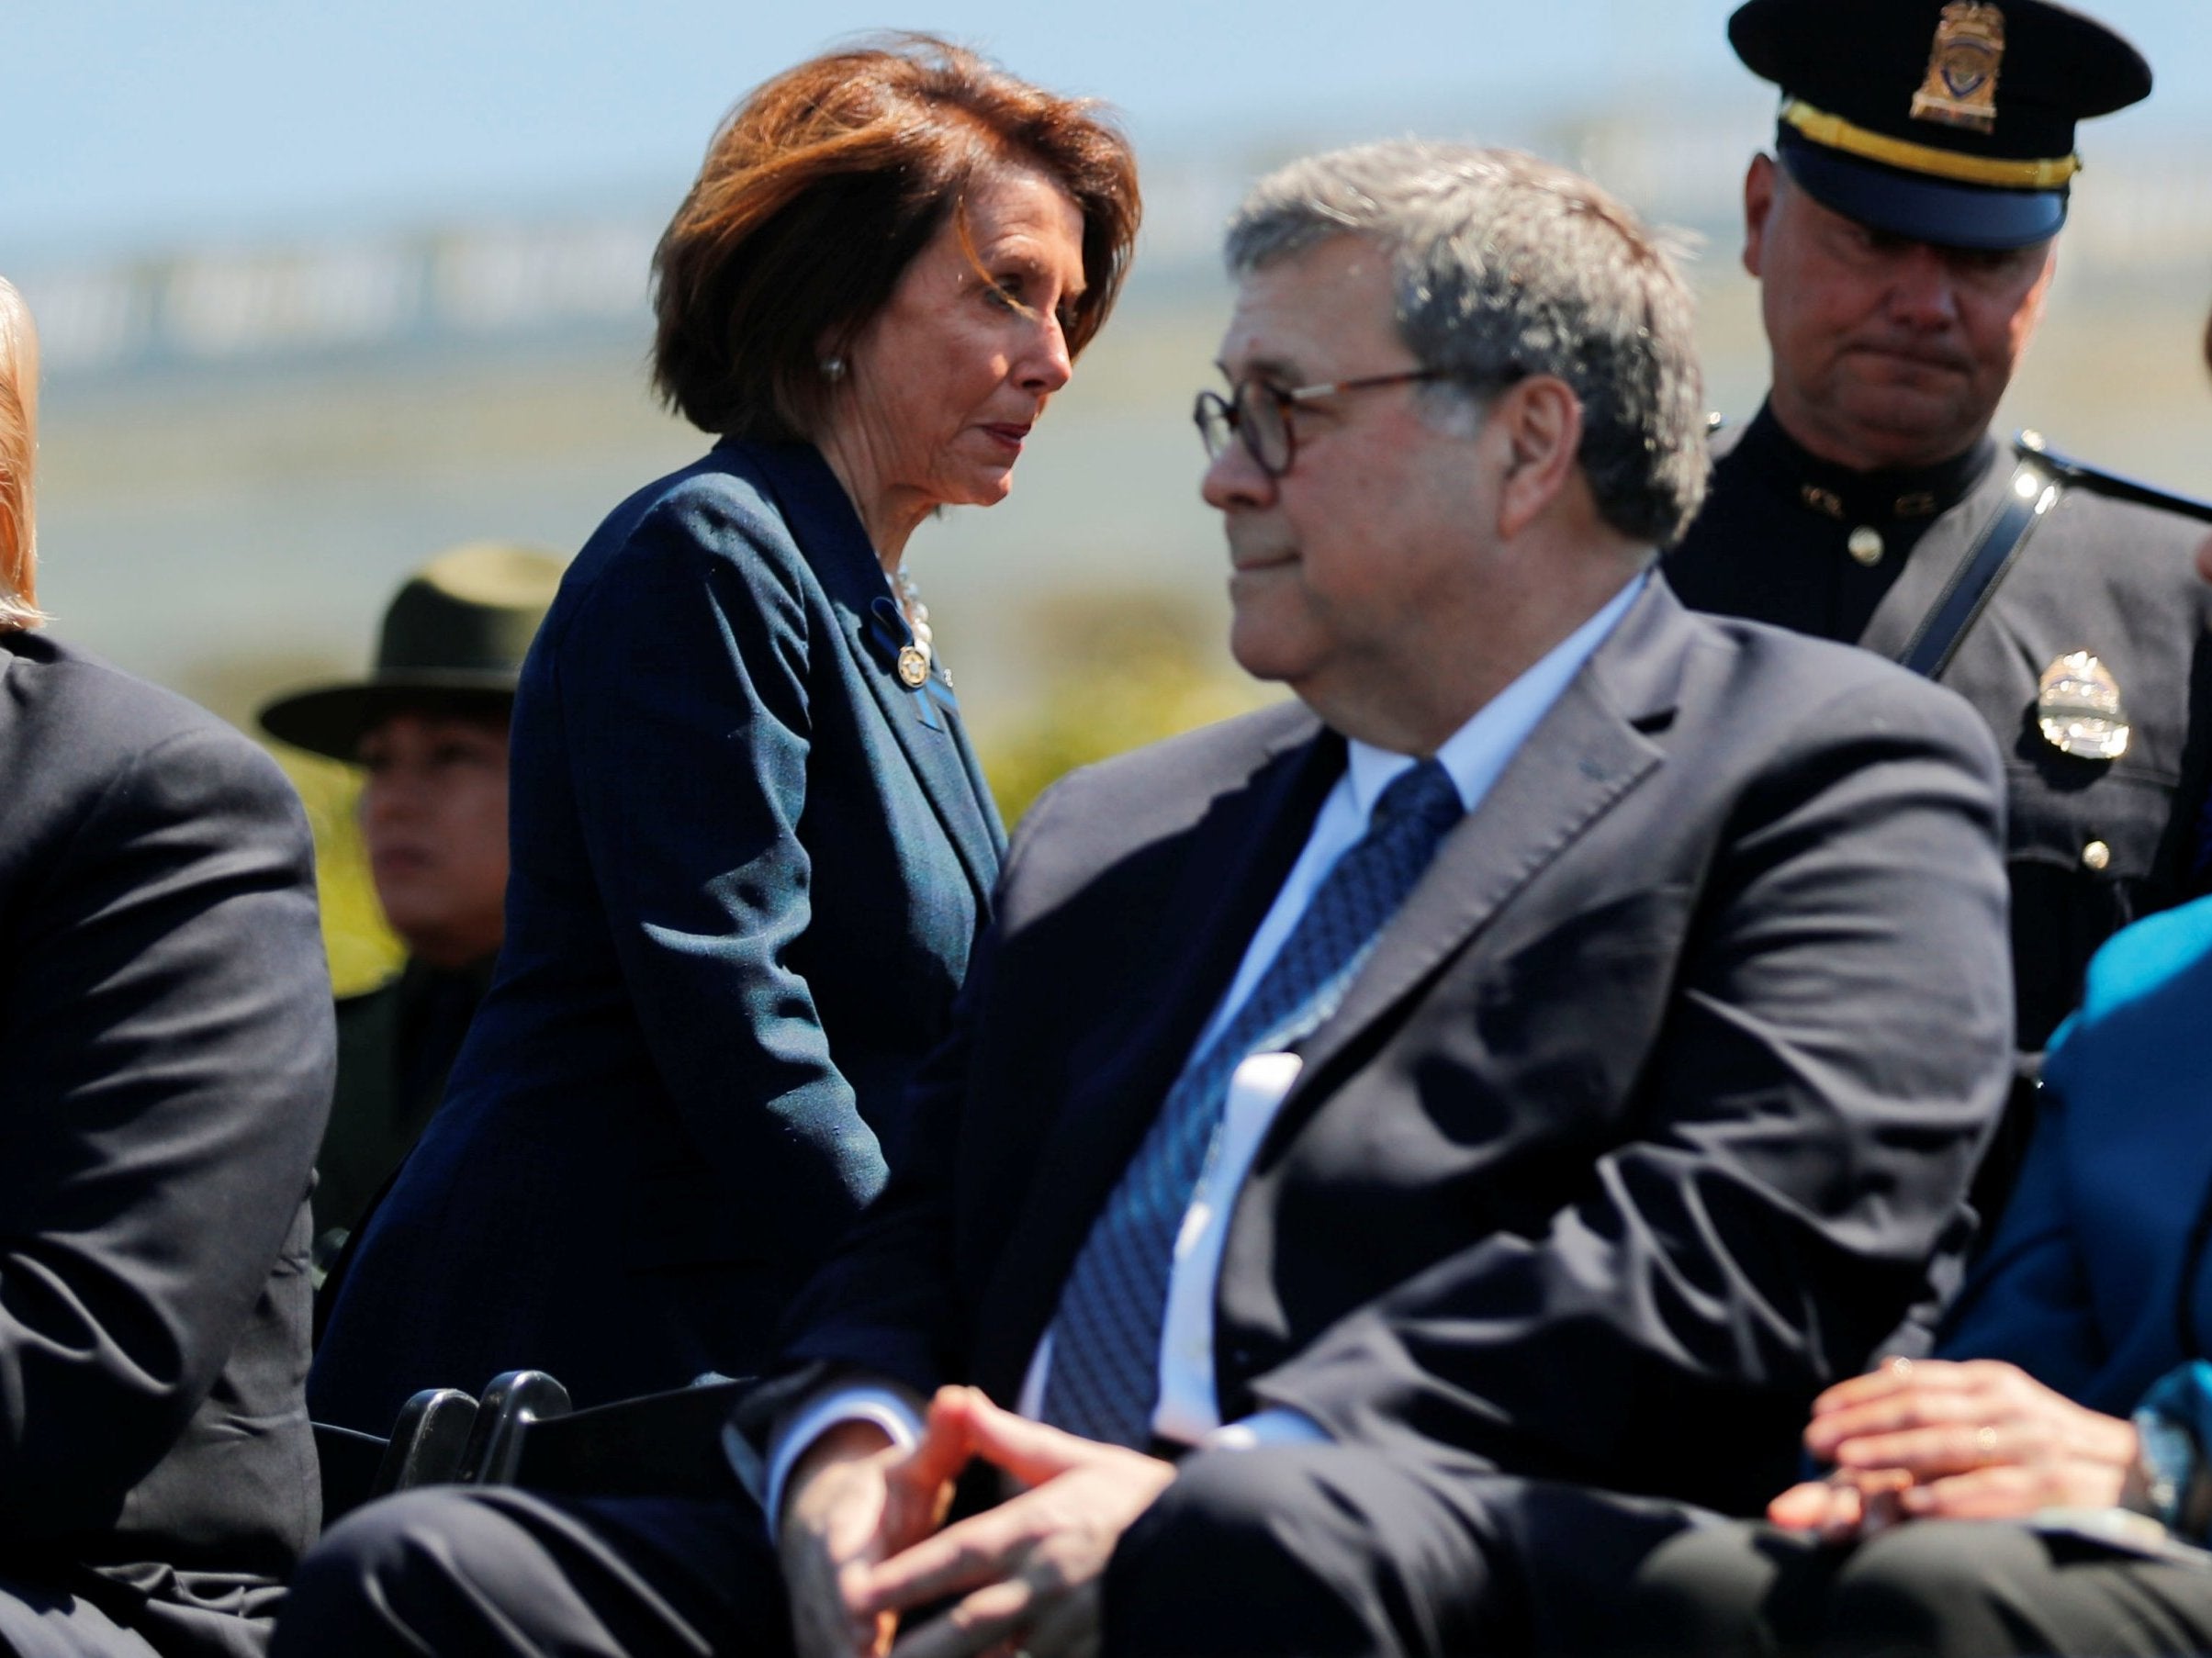 Speaker of the House Nancy Pelosi walks behind U.S. Attorney General William Barr as they both attend the 38th Annual National Peace Officers Memorial Service on Capitol Hill in Washington, US on 15 May 2019.